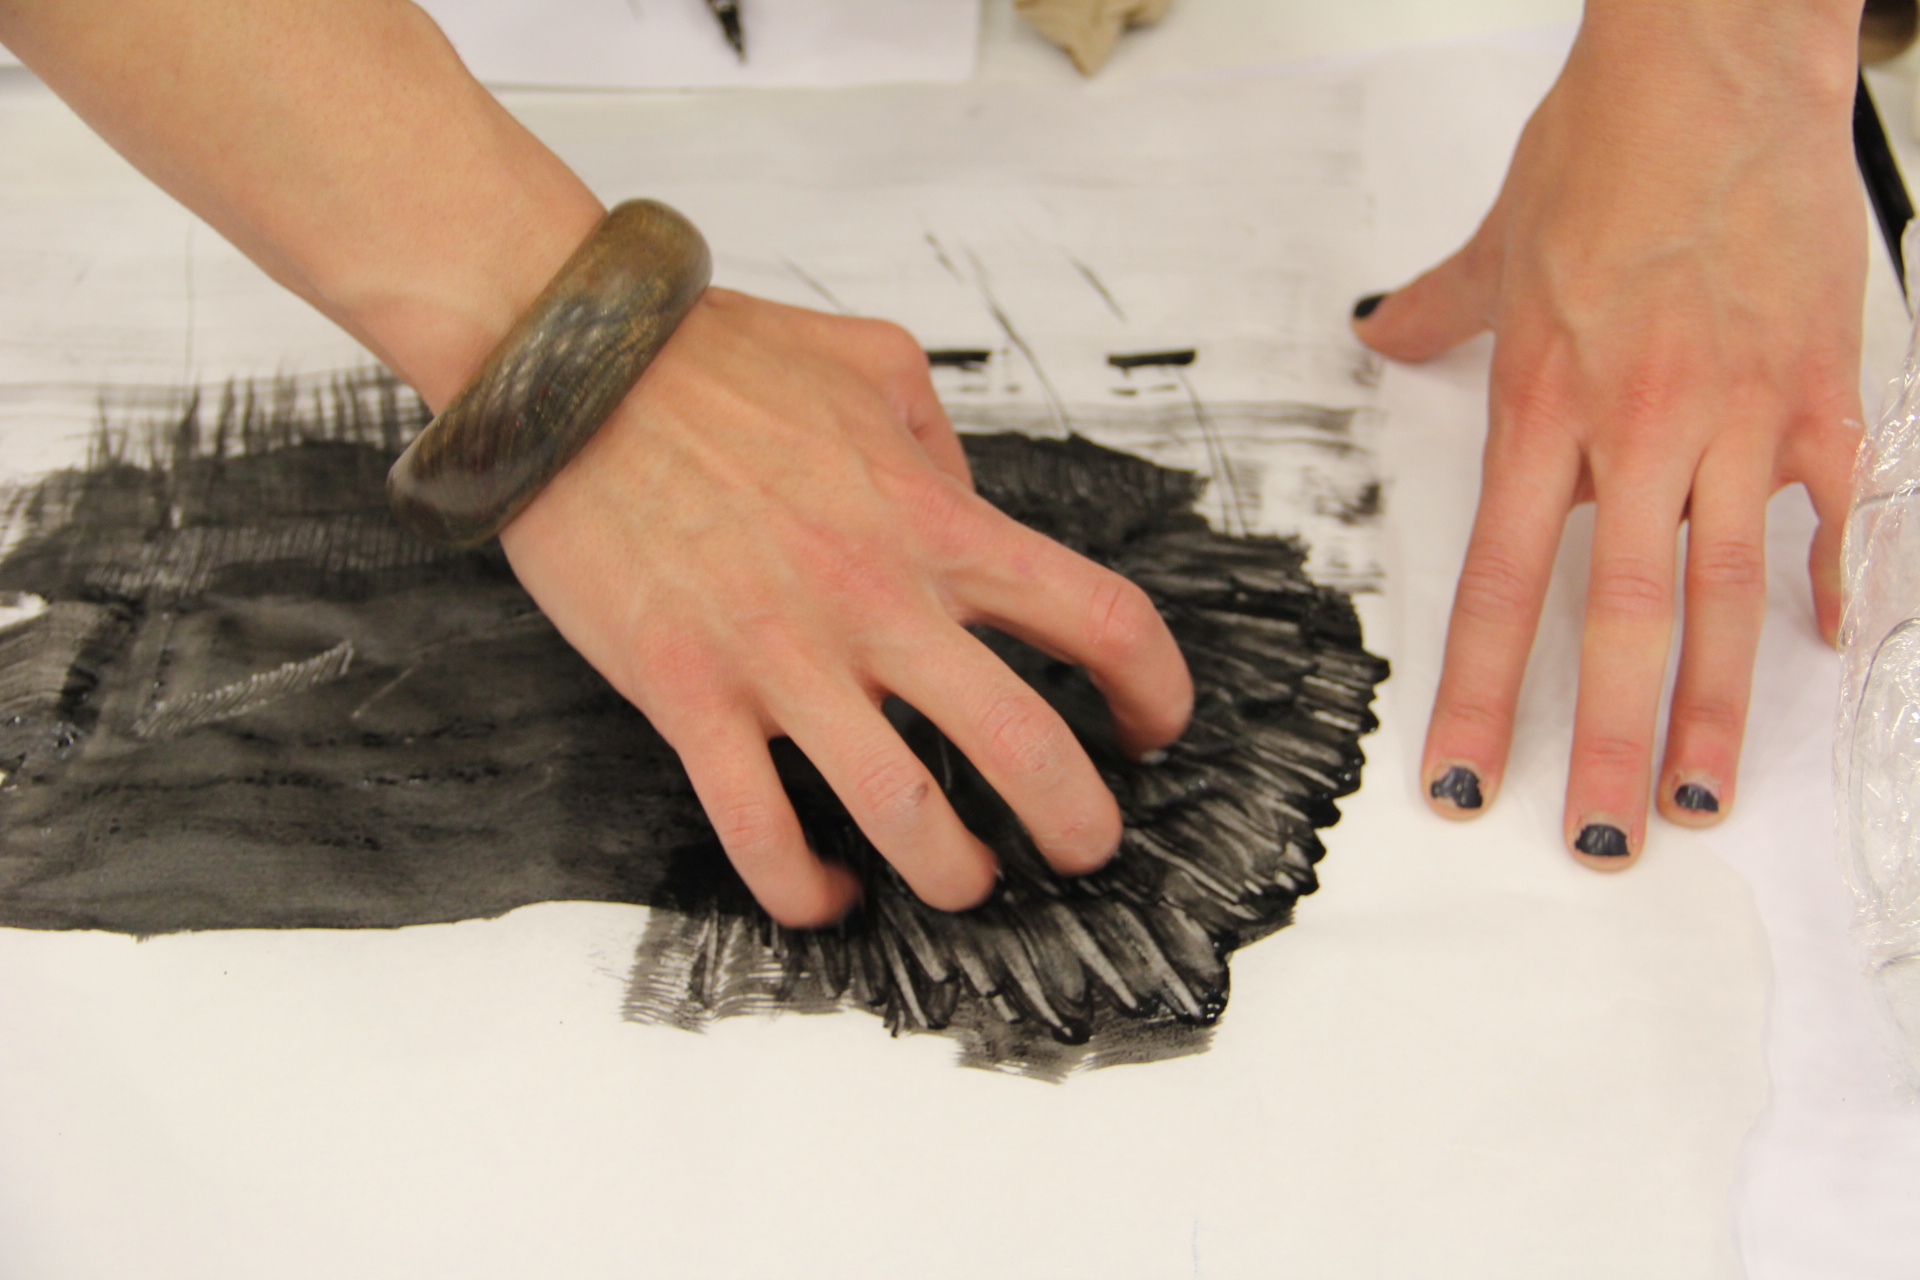 Hands rubbing charcoal into paper